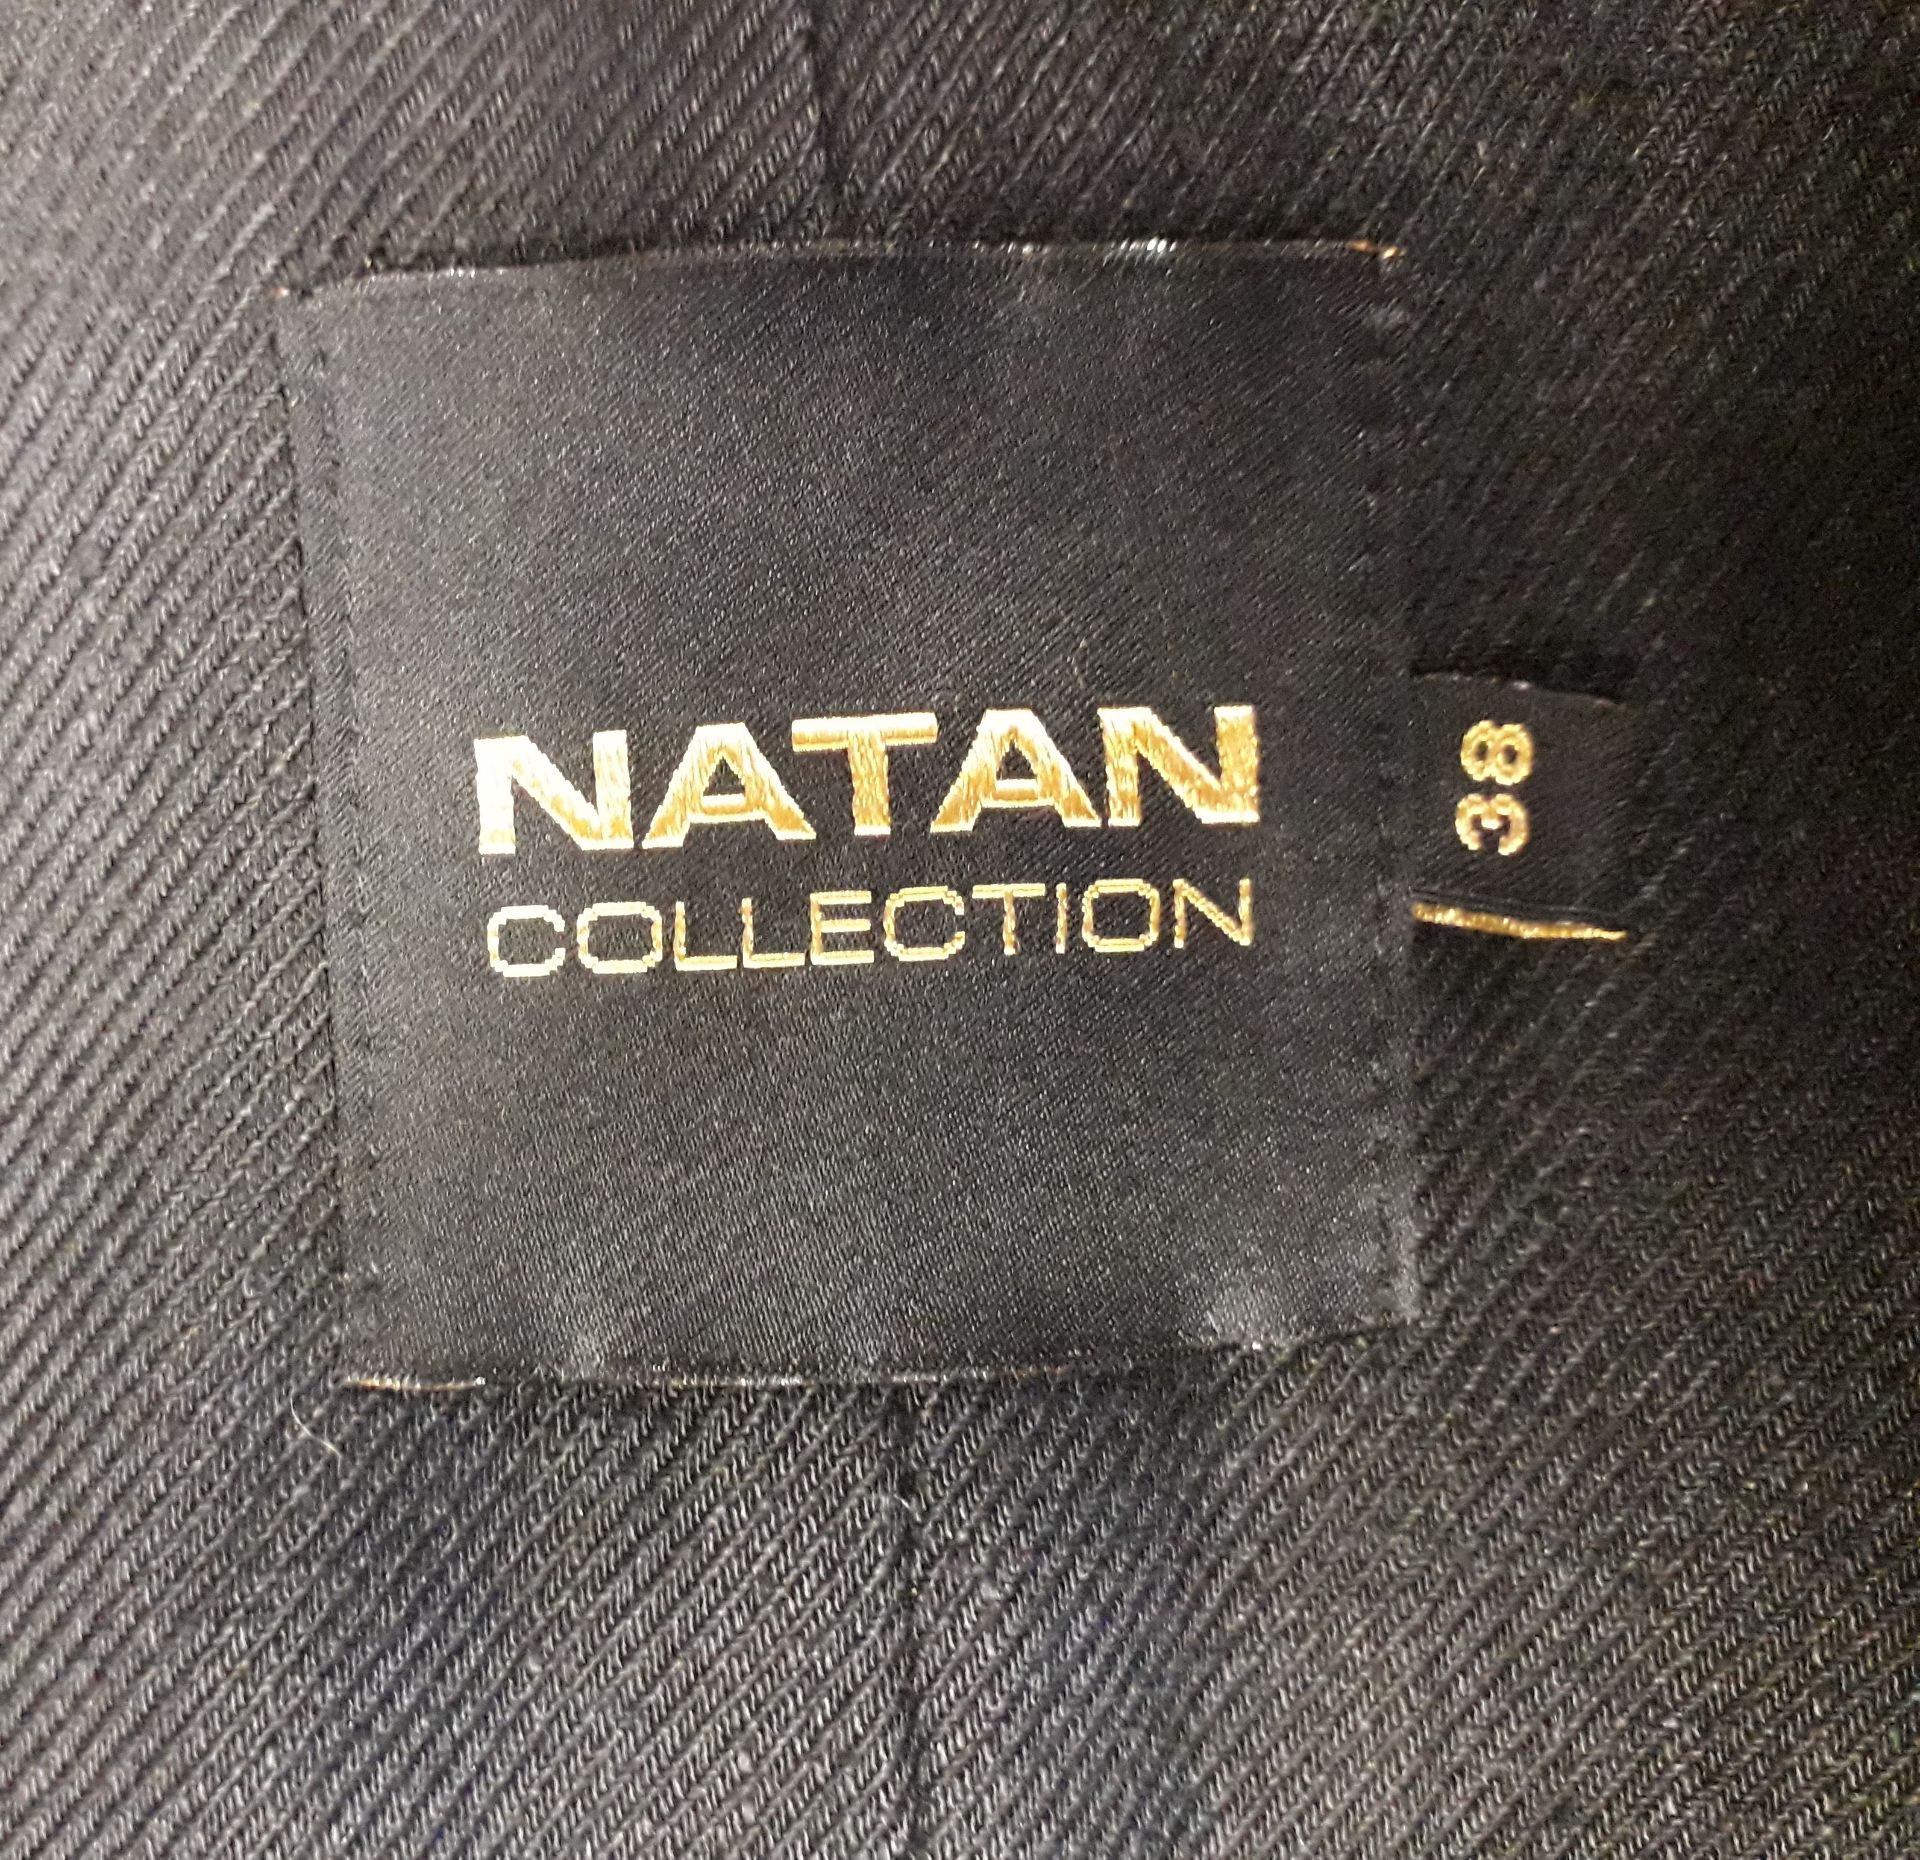 1 x Natan Black Bolero Jacket - Size: 10 - Material: 100% Linen - From a High End Clothing - Image 5 of 5